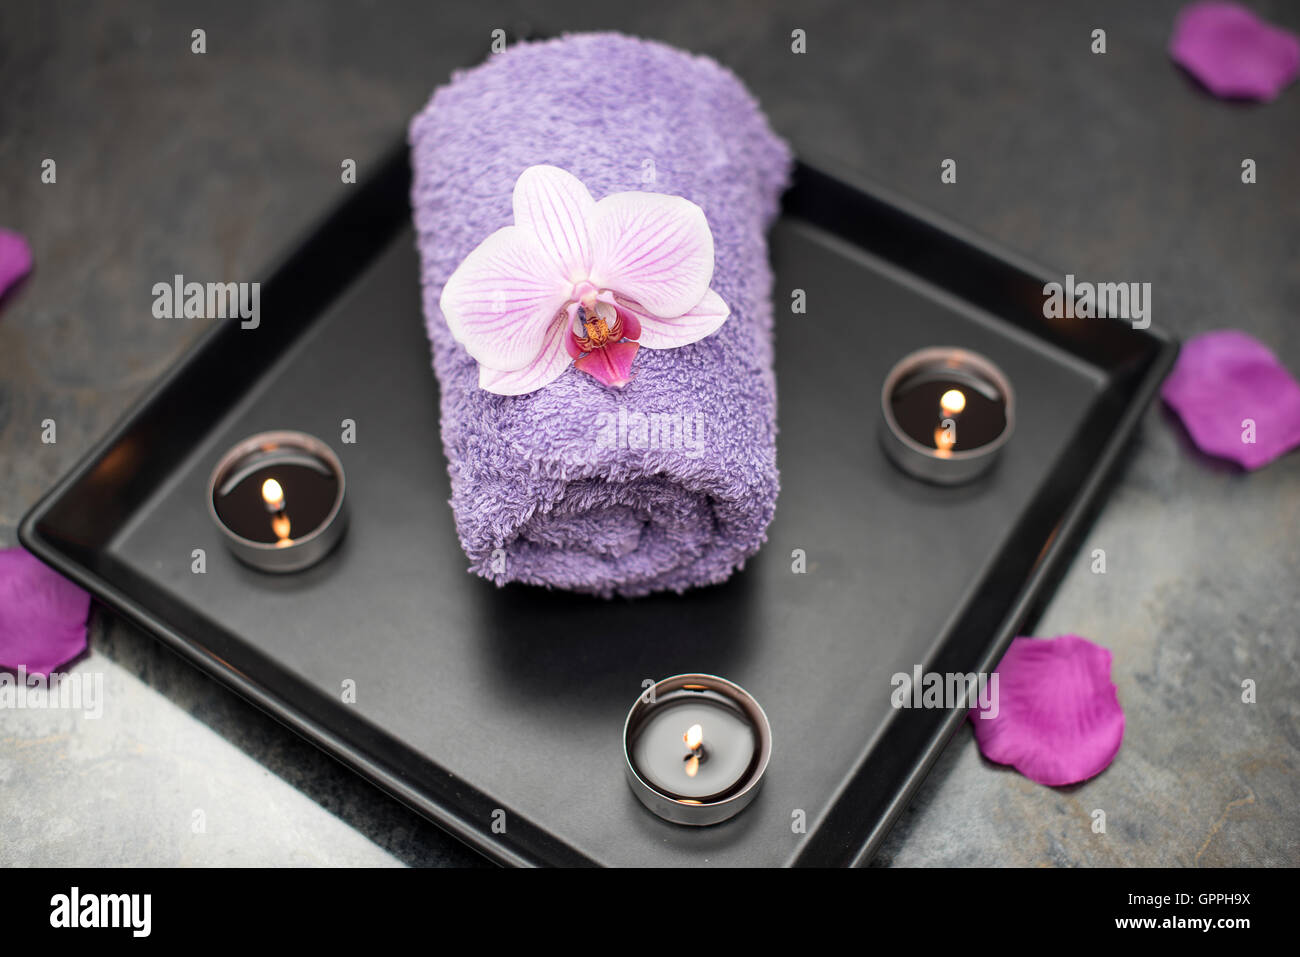 Beauty salon decoration in massage room, candles, towel and orchid. Stock Photo